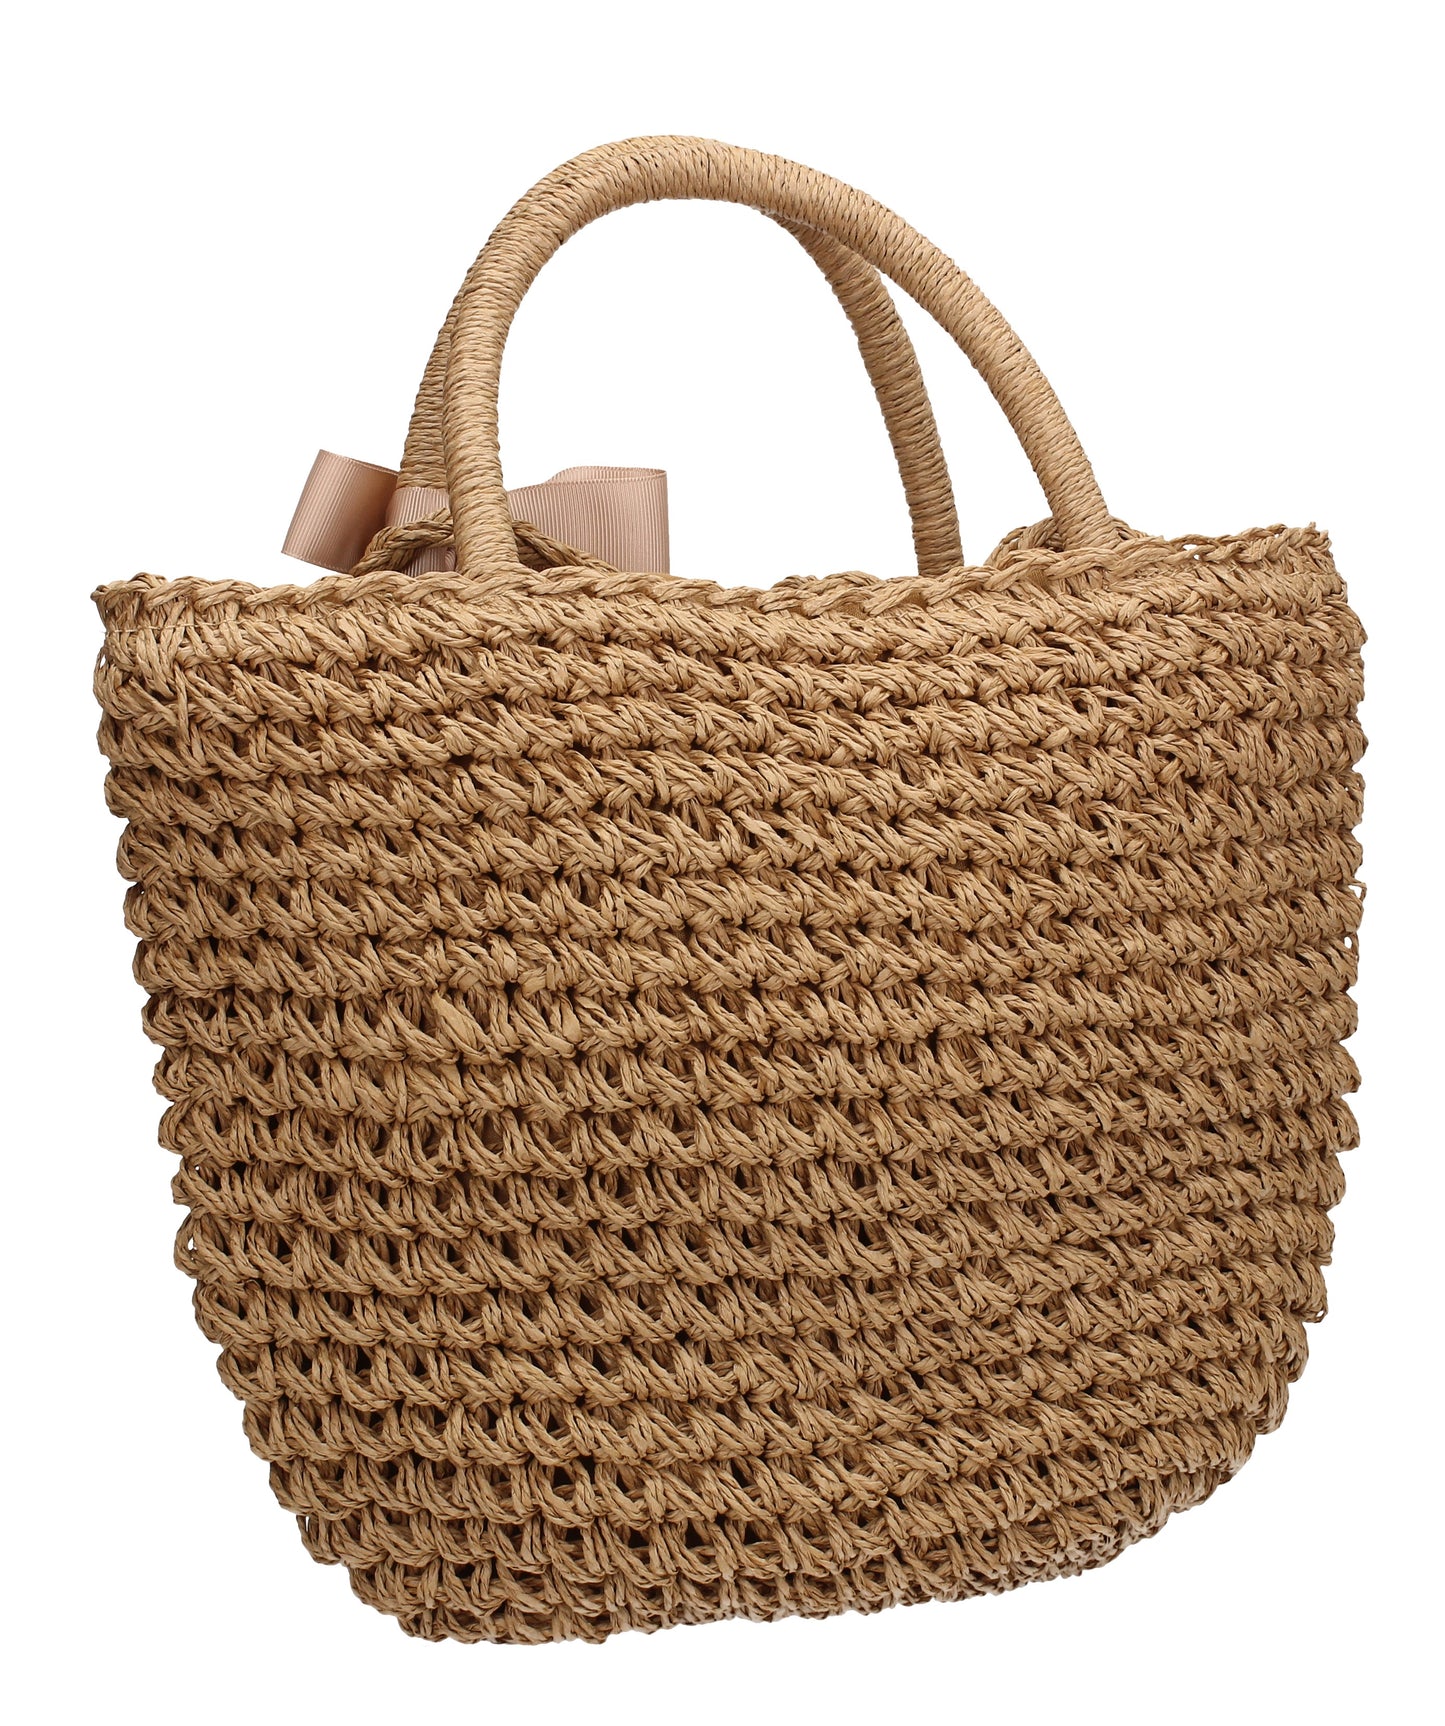 Swanky Swans Straw Soft Basket Style Beach Tote Bag Summer HandbagPerfect for School, Weddings, Day out!